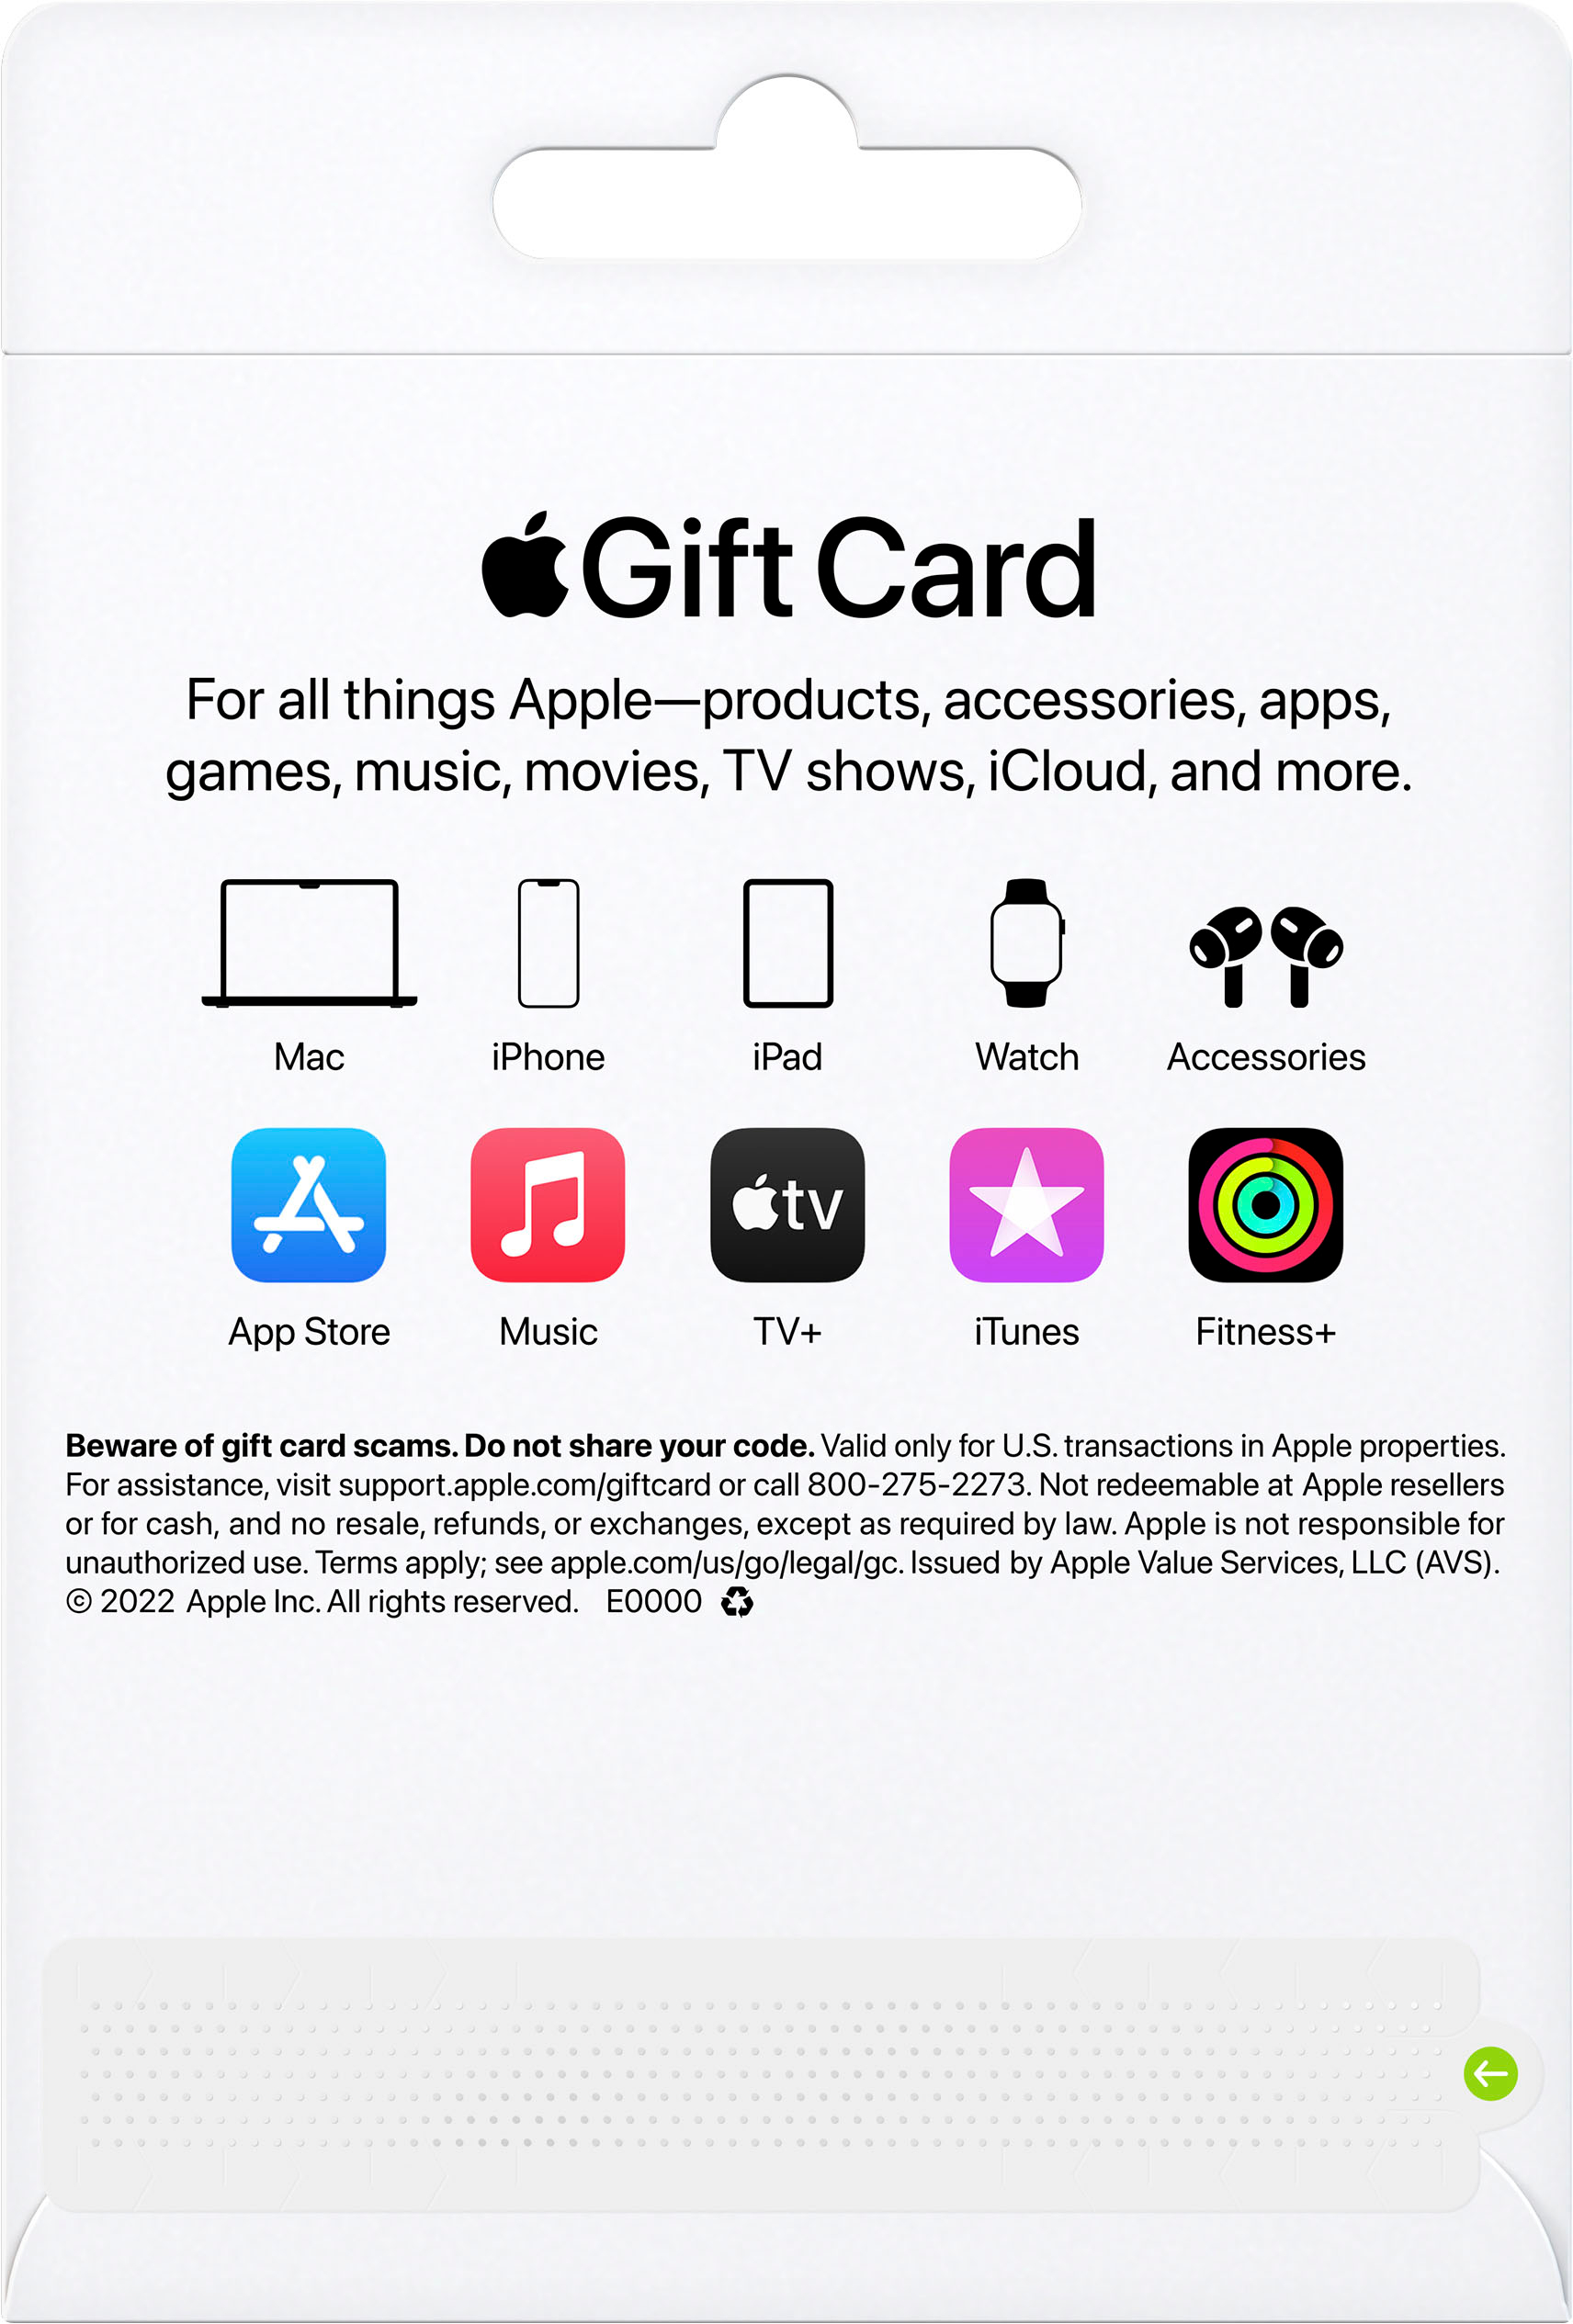 binden mooi zo ring Apple Gift Card App Store, Music, iTunes, iPhone, iPad, AirPods,  accessories, and more APPLE GIFT CARD $100 - Best Buy